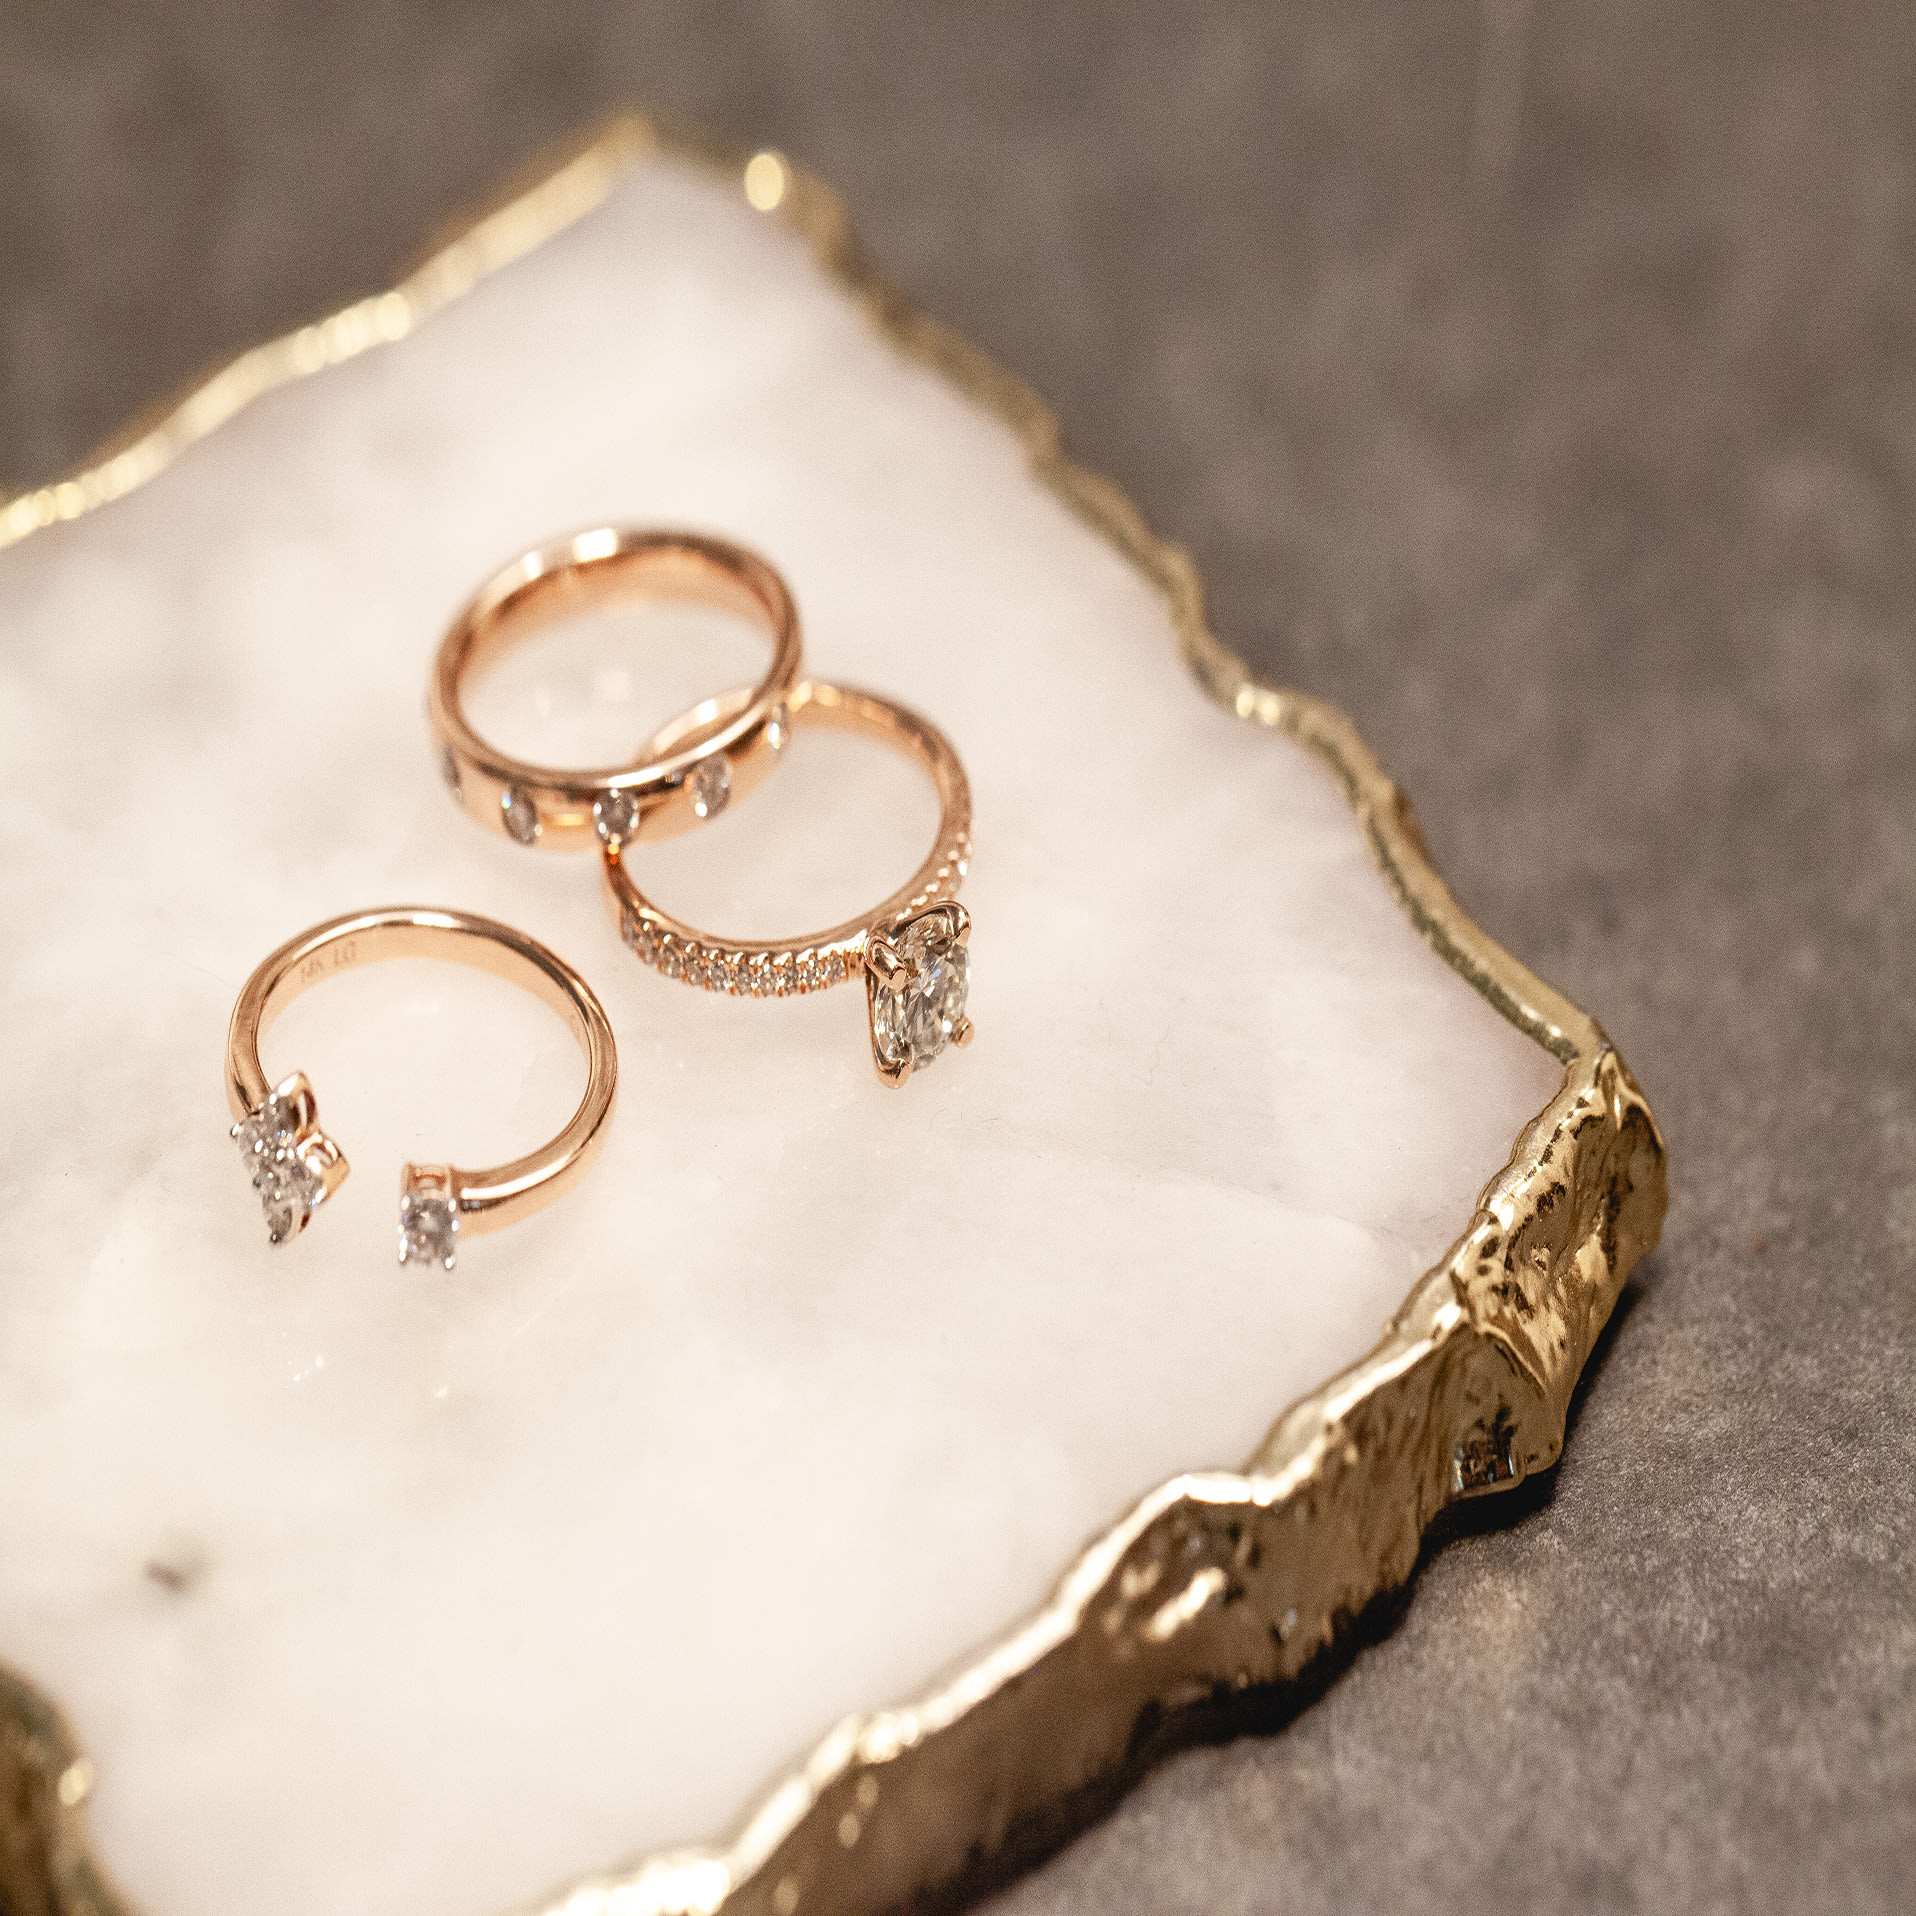 Change up your bridal set with different style stackable rings.